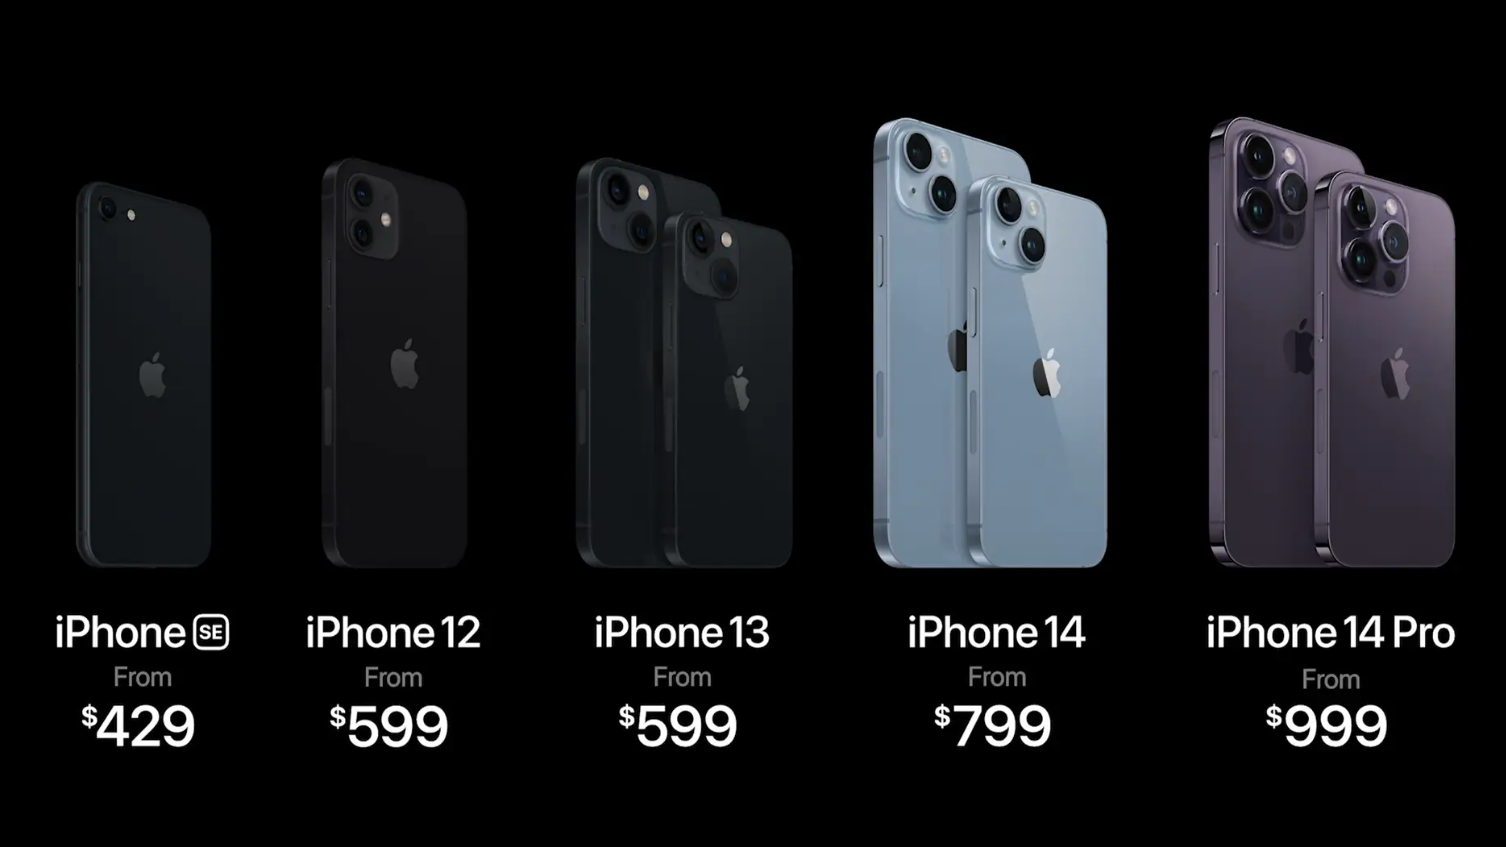 A graphic showing the new iPhone lineup following the launch of iPhone 14.